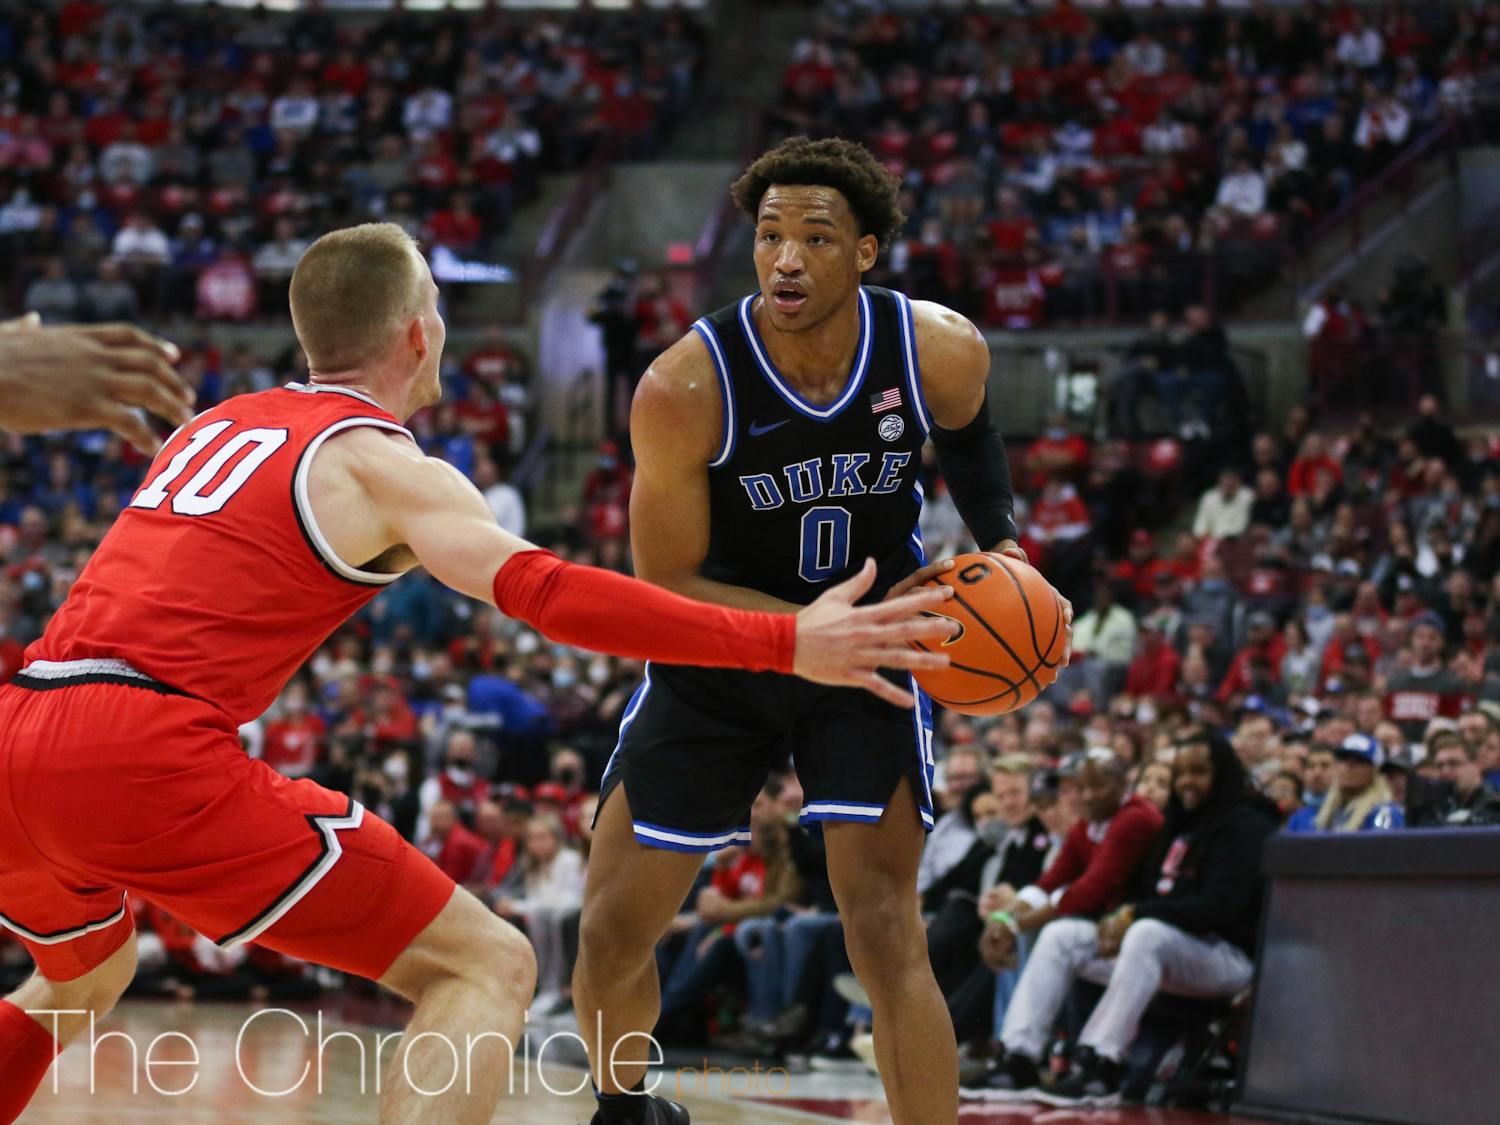 The Duke Blue Devils ended the night with an upsetting loss to Ohio State.